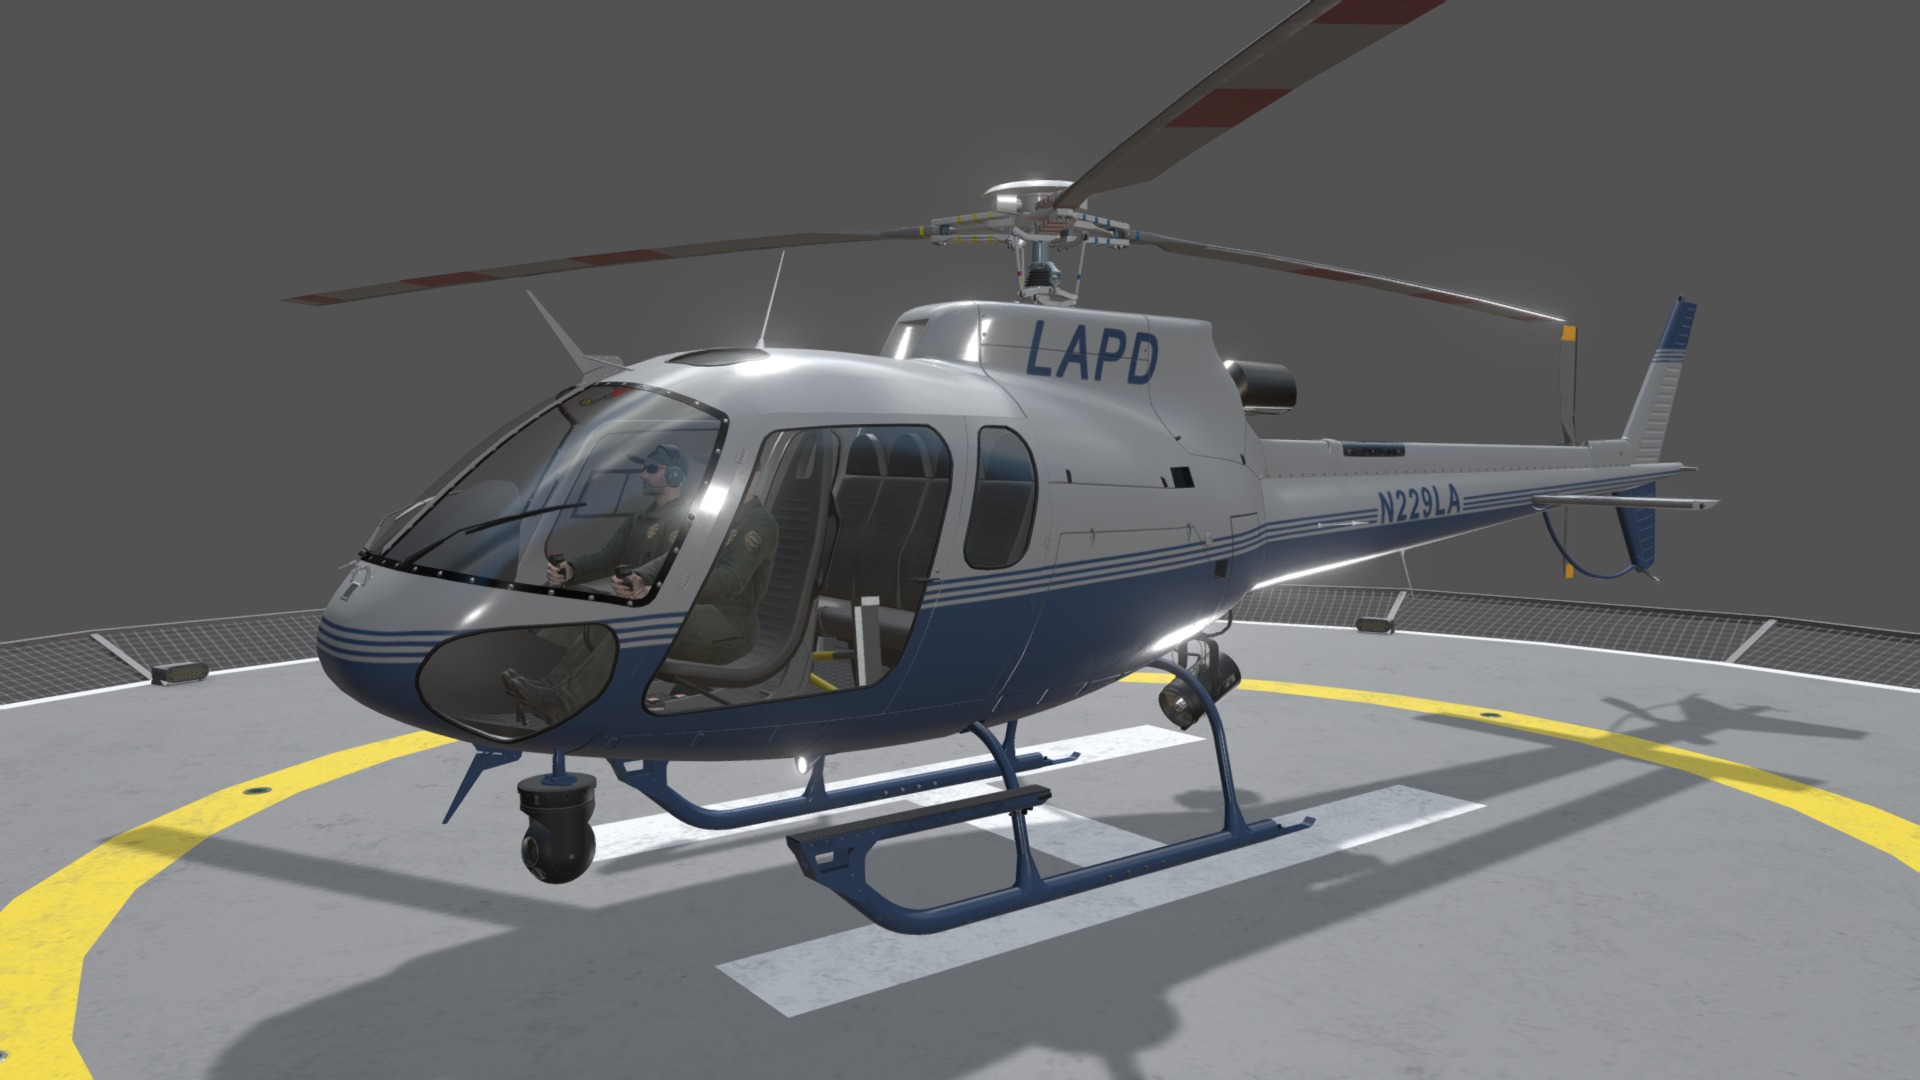 3D model AS-350 LAPD 3 Animated - This is a 3D model of the AS-350 LAPD 3 Animated. The 3D model is about a helicopter on the ground.